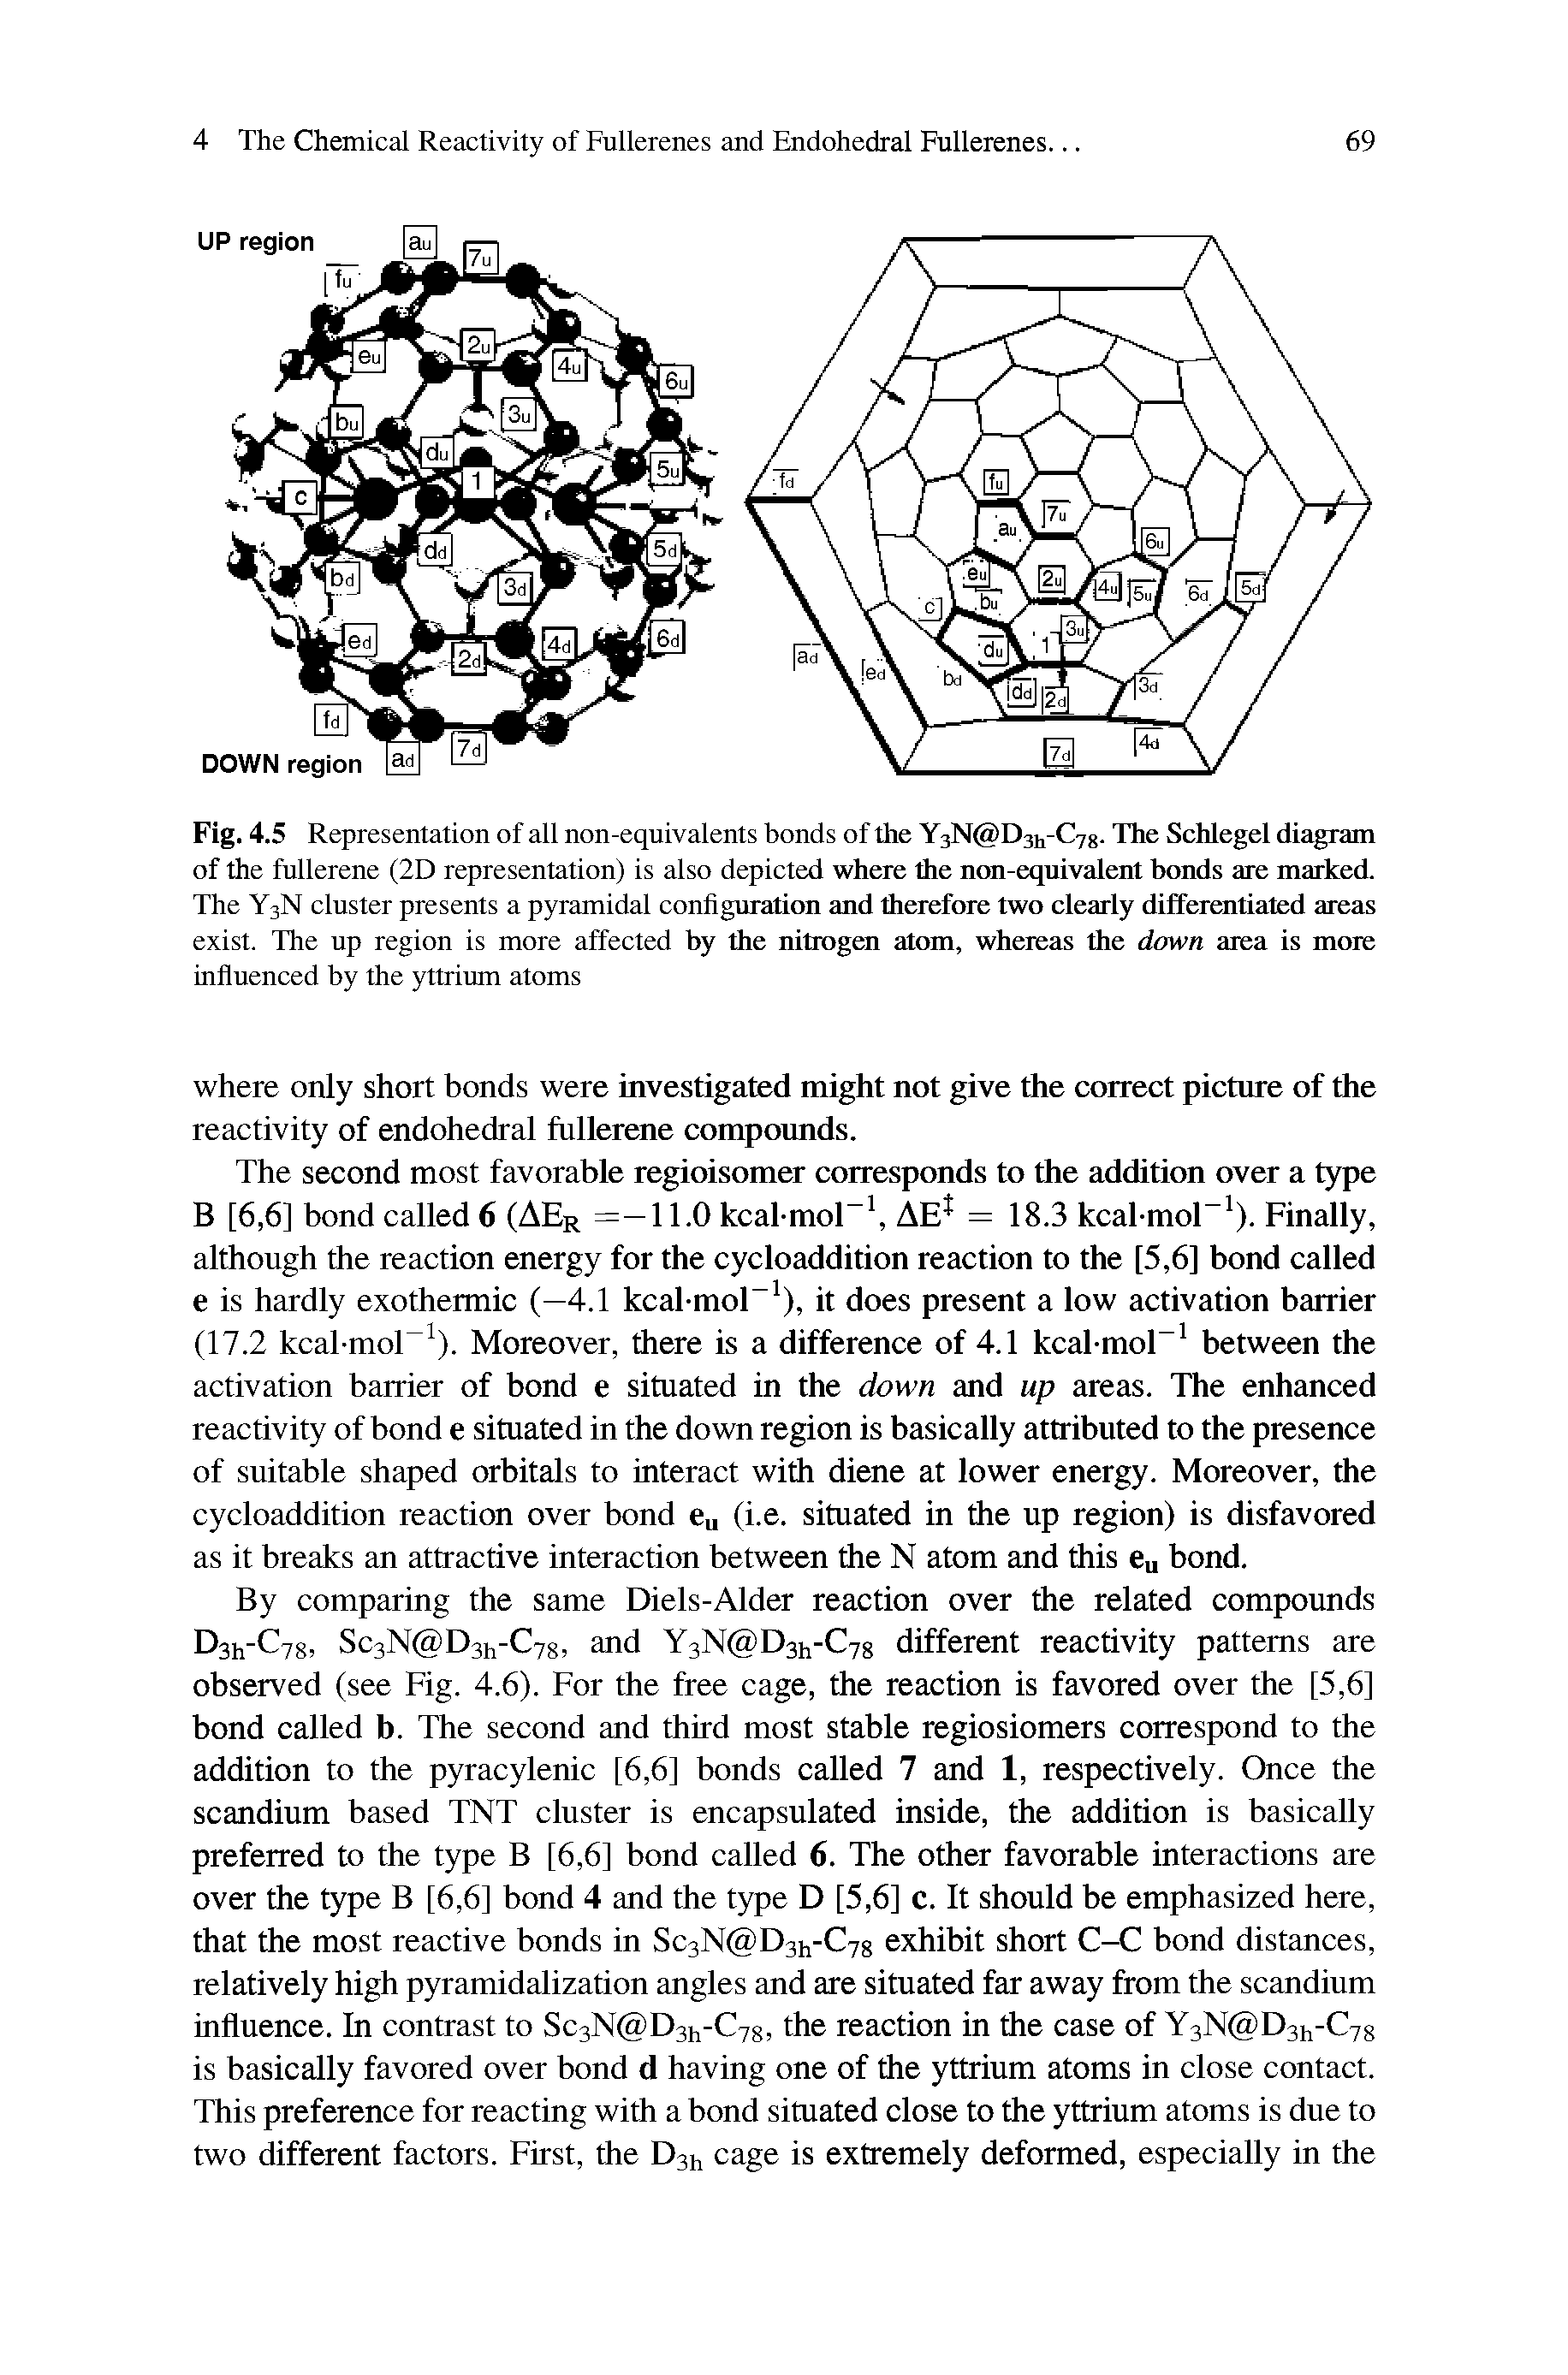 Fig. 4.5 Representation of all non-equivalents bonds of the Y3N D3i,- Cyg. The Schlegel diagram of the fullerene (2D representation) is also depicted where the non-equivalent bonds are marked. The Y3N cluster presents a pyramidal configuration and therefore two clearly diEferrmtiated areas exist. The up region is more affected by the nitrogen atom, whereas the down area is more...